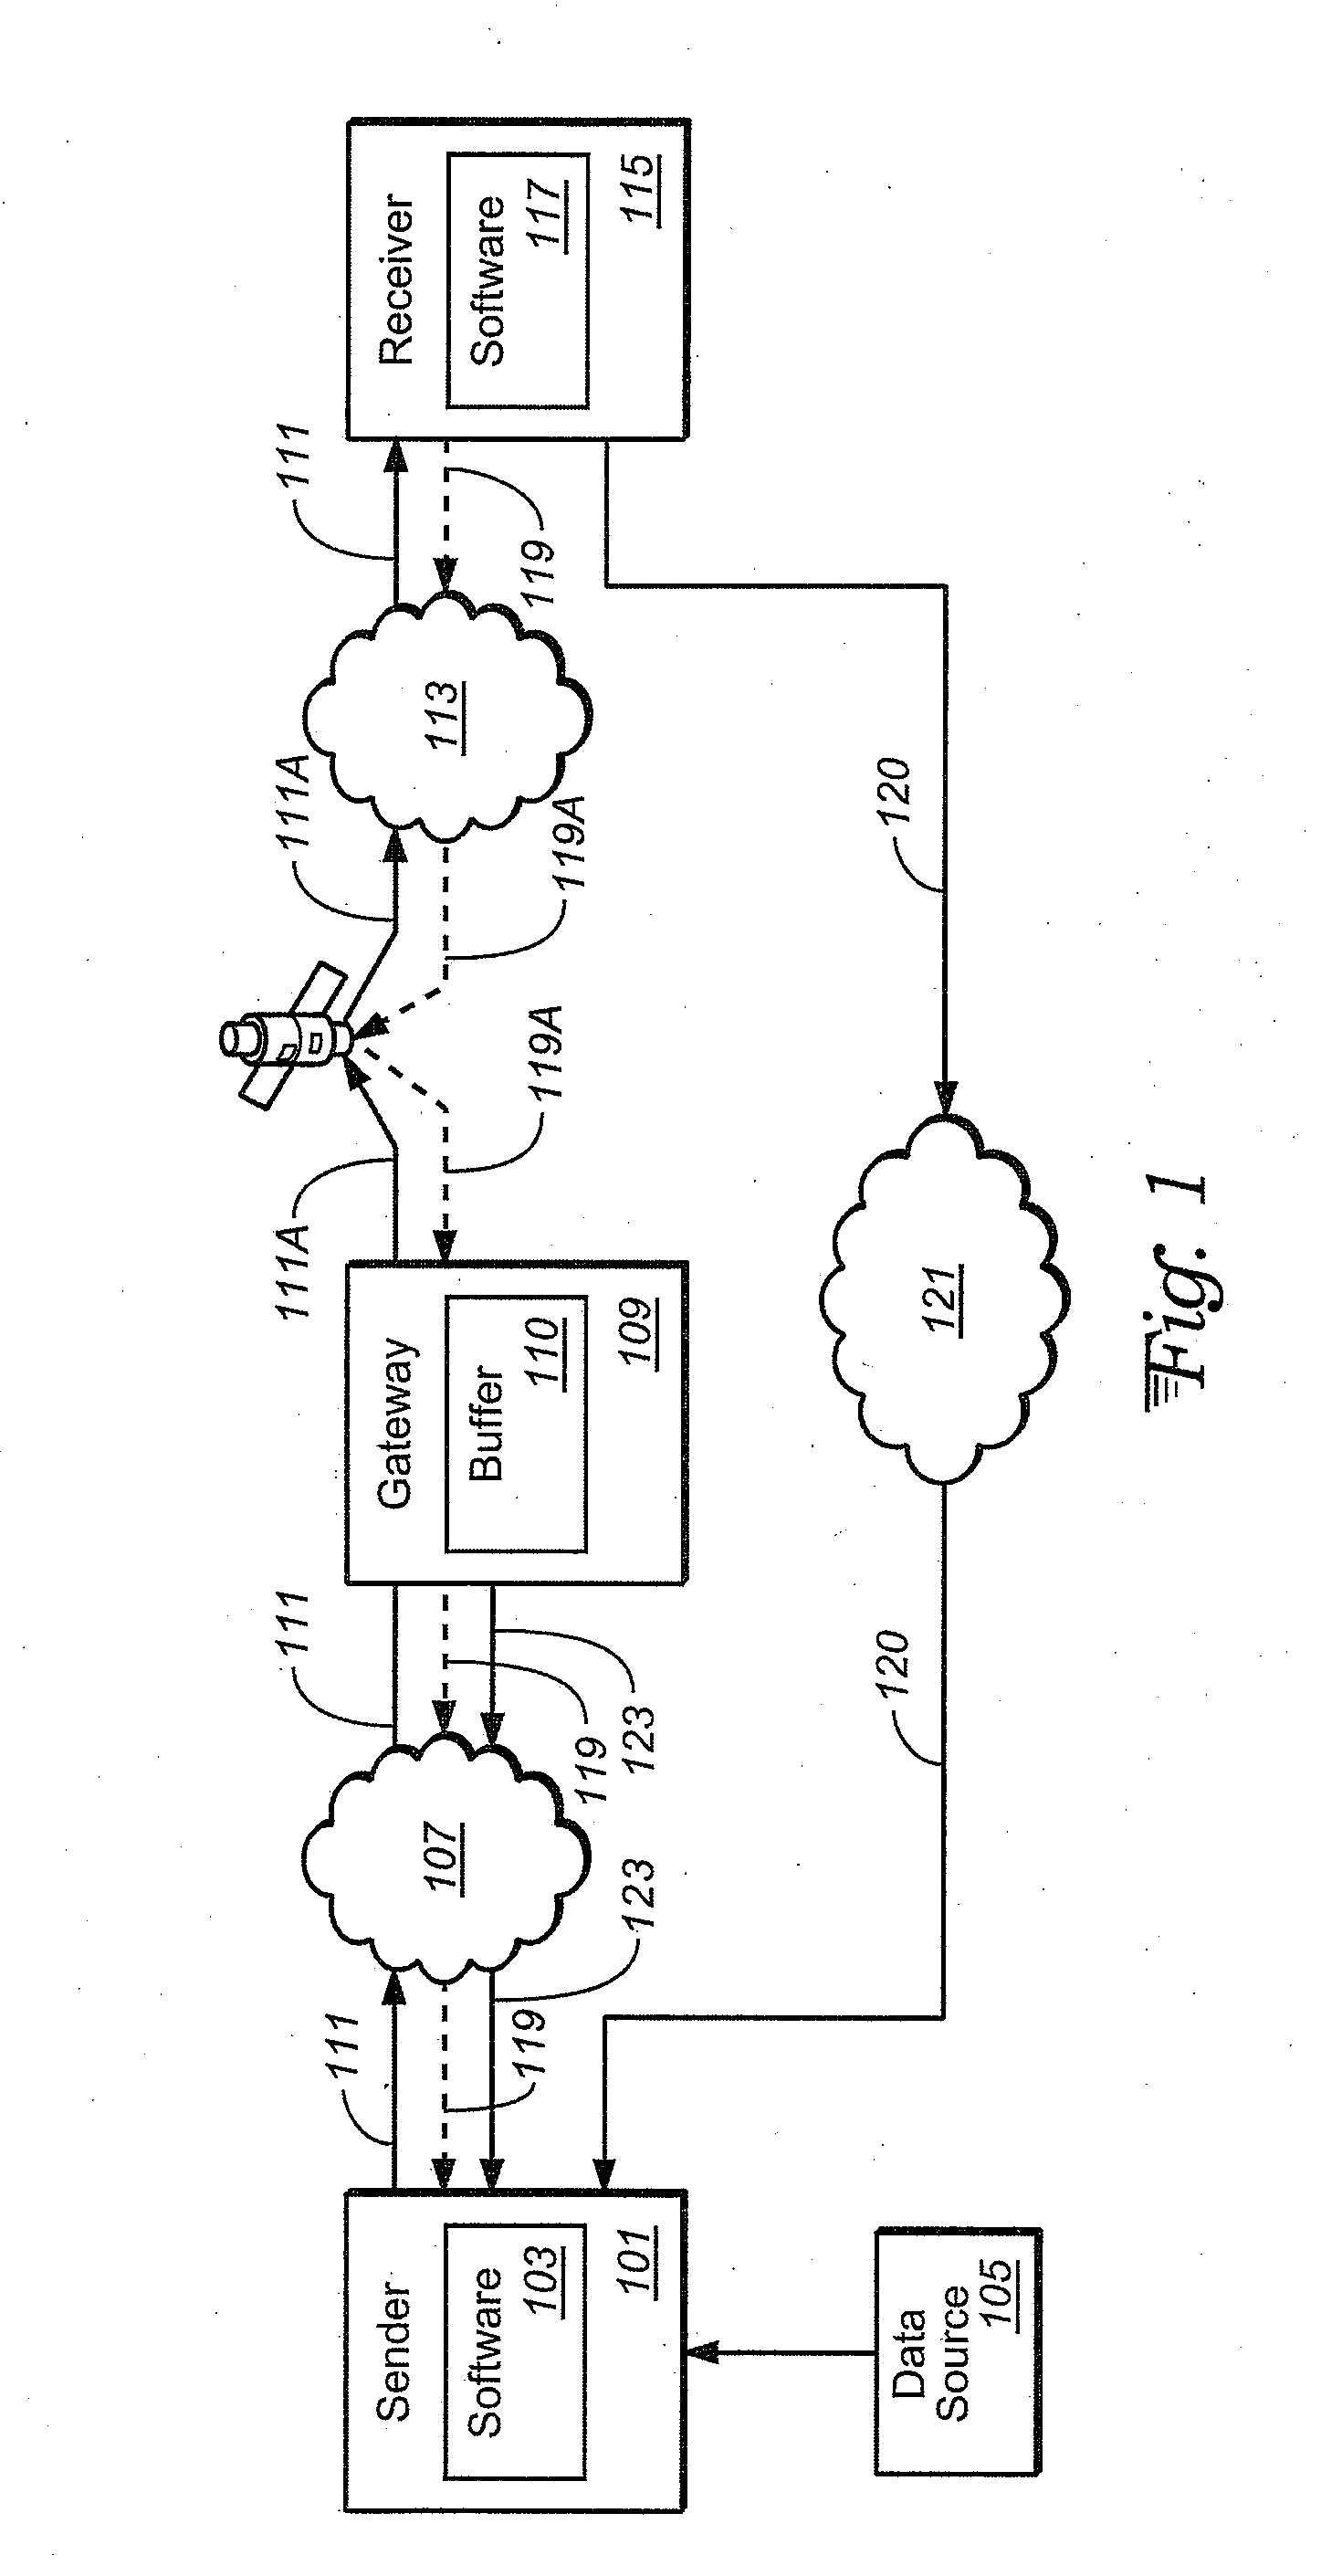 Fault-tolerant data transmission system for networks with non-full-duplex or asymmetric transport